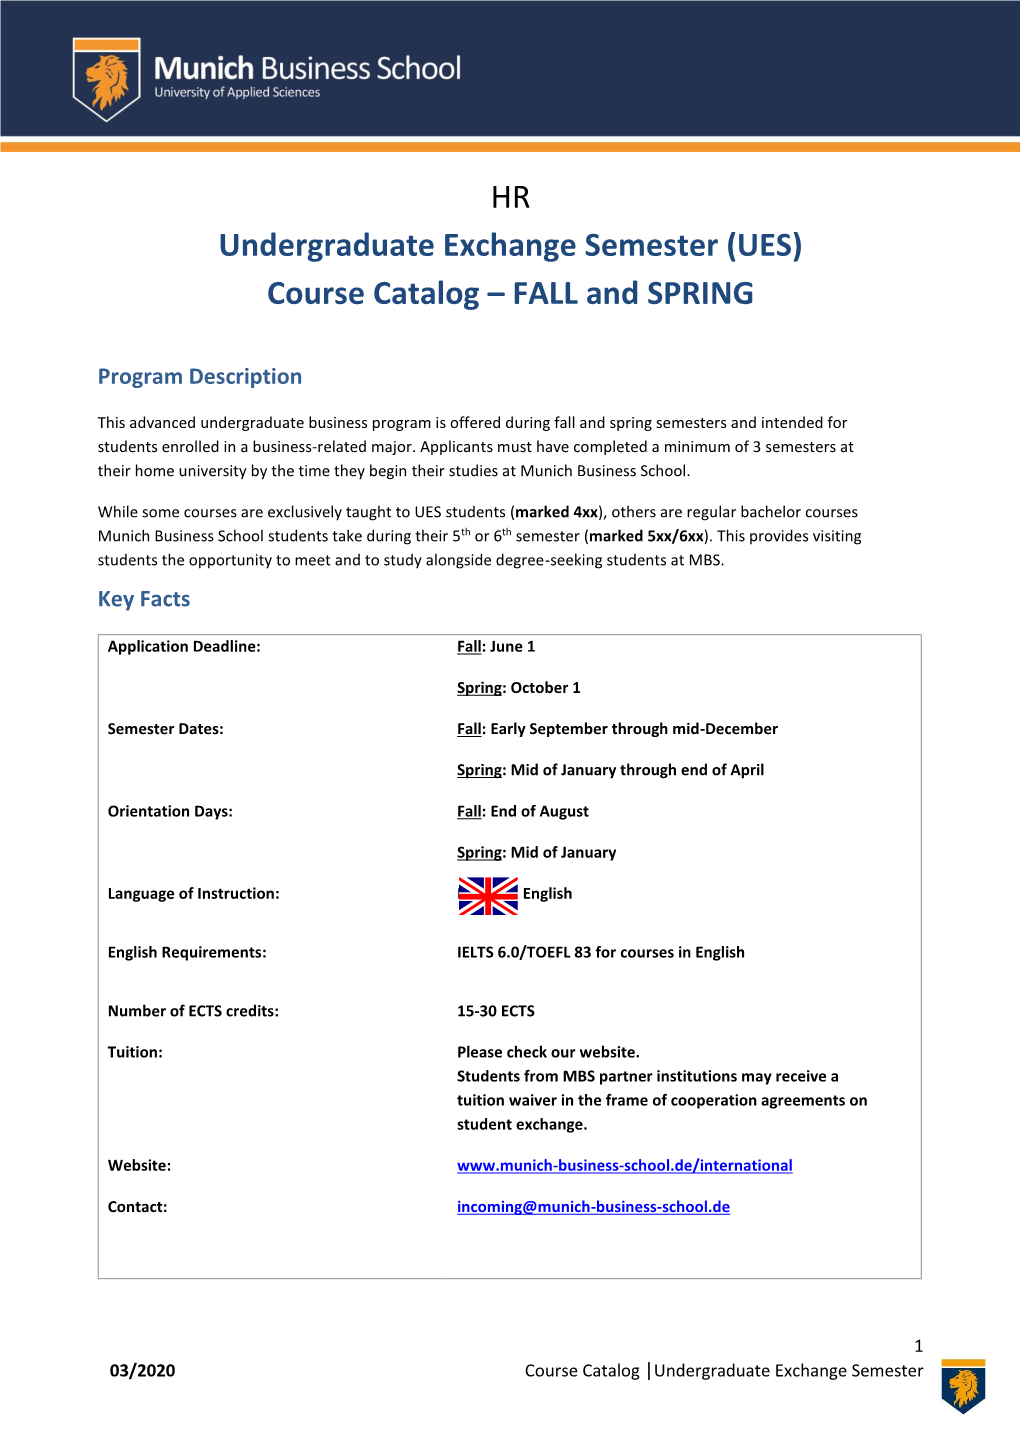 HR Undergraduate Exchange Semester (UES) Course Catalog – FALL and SPRING